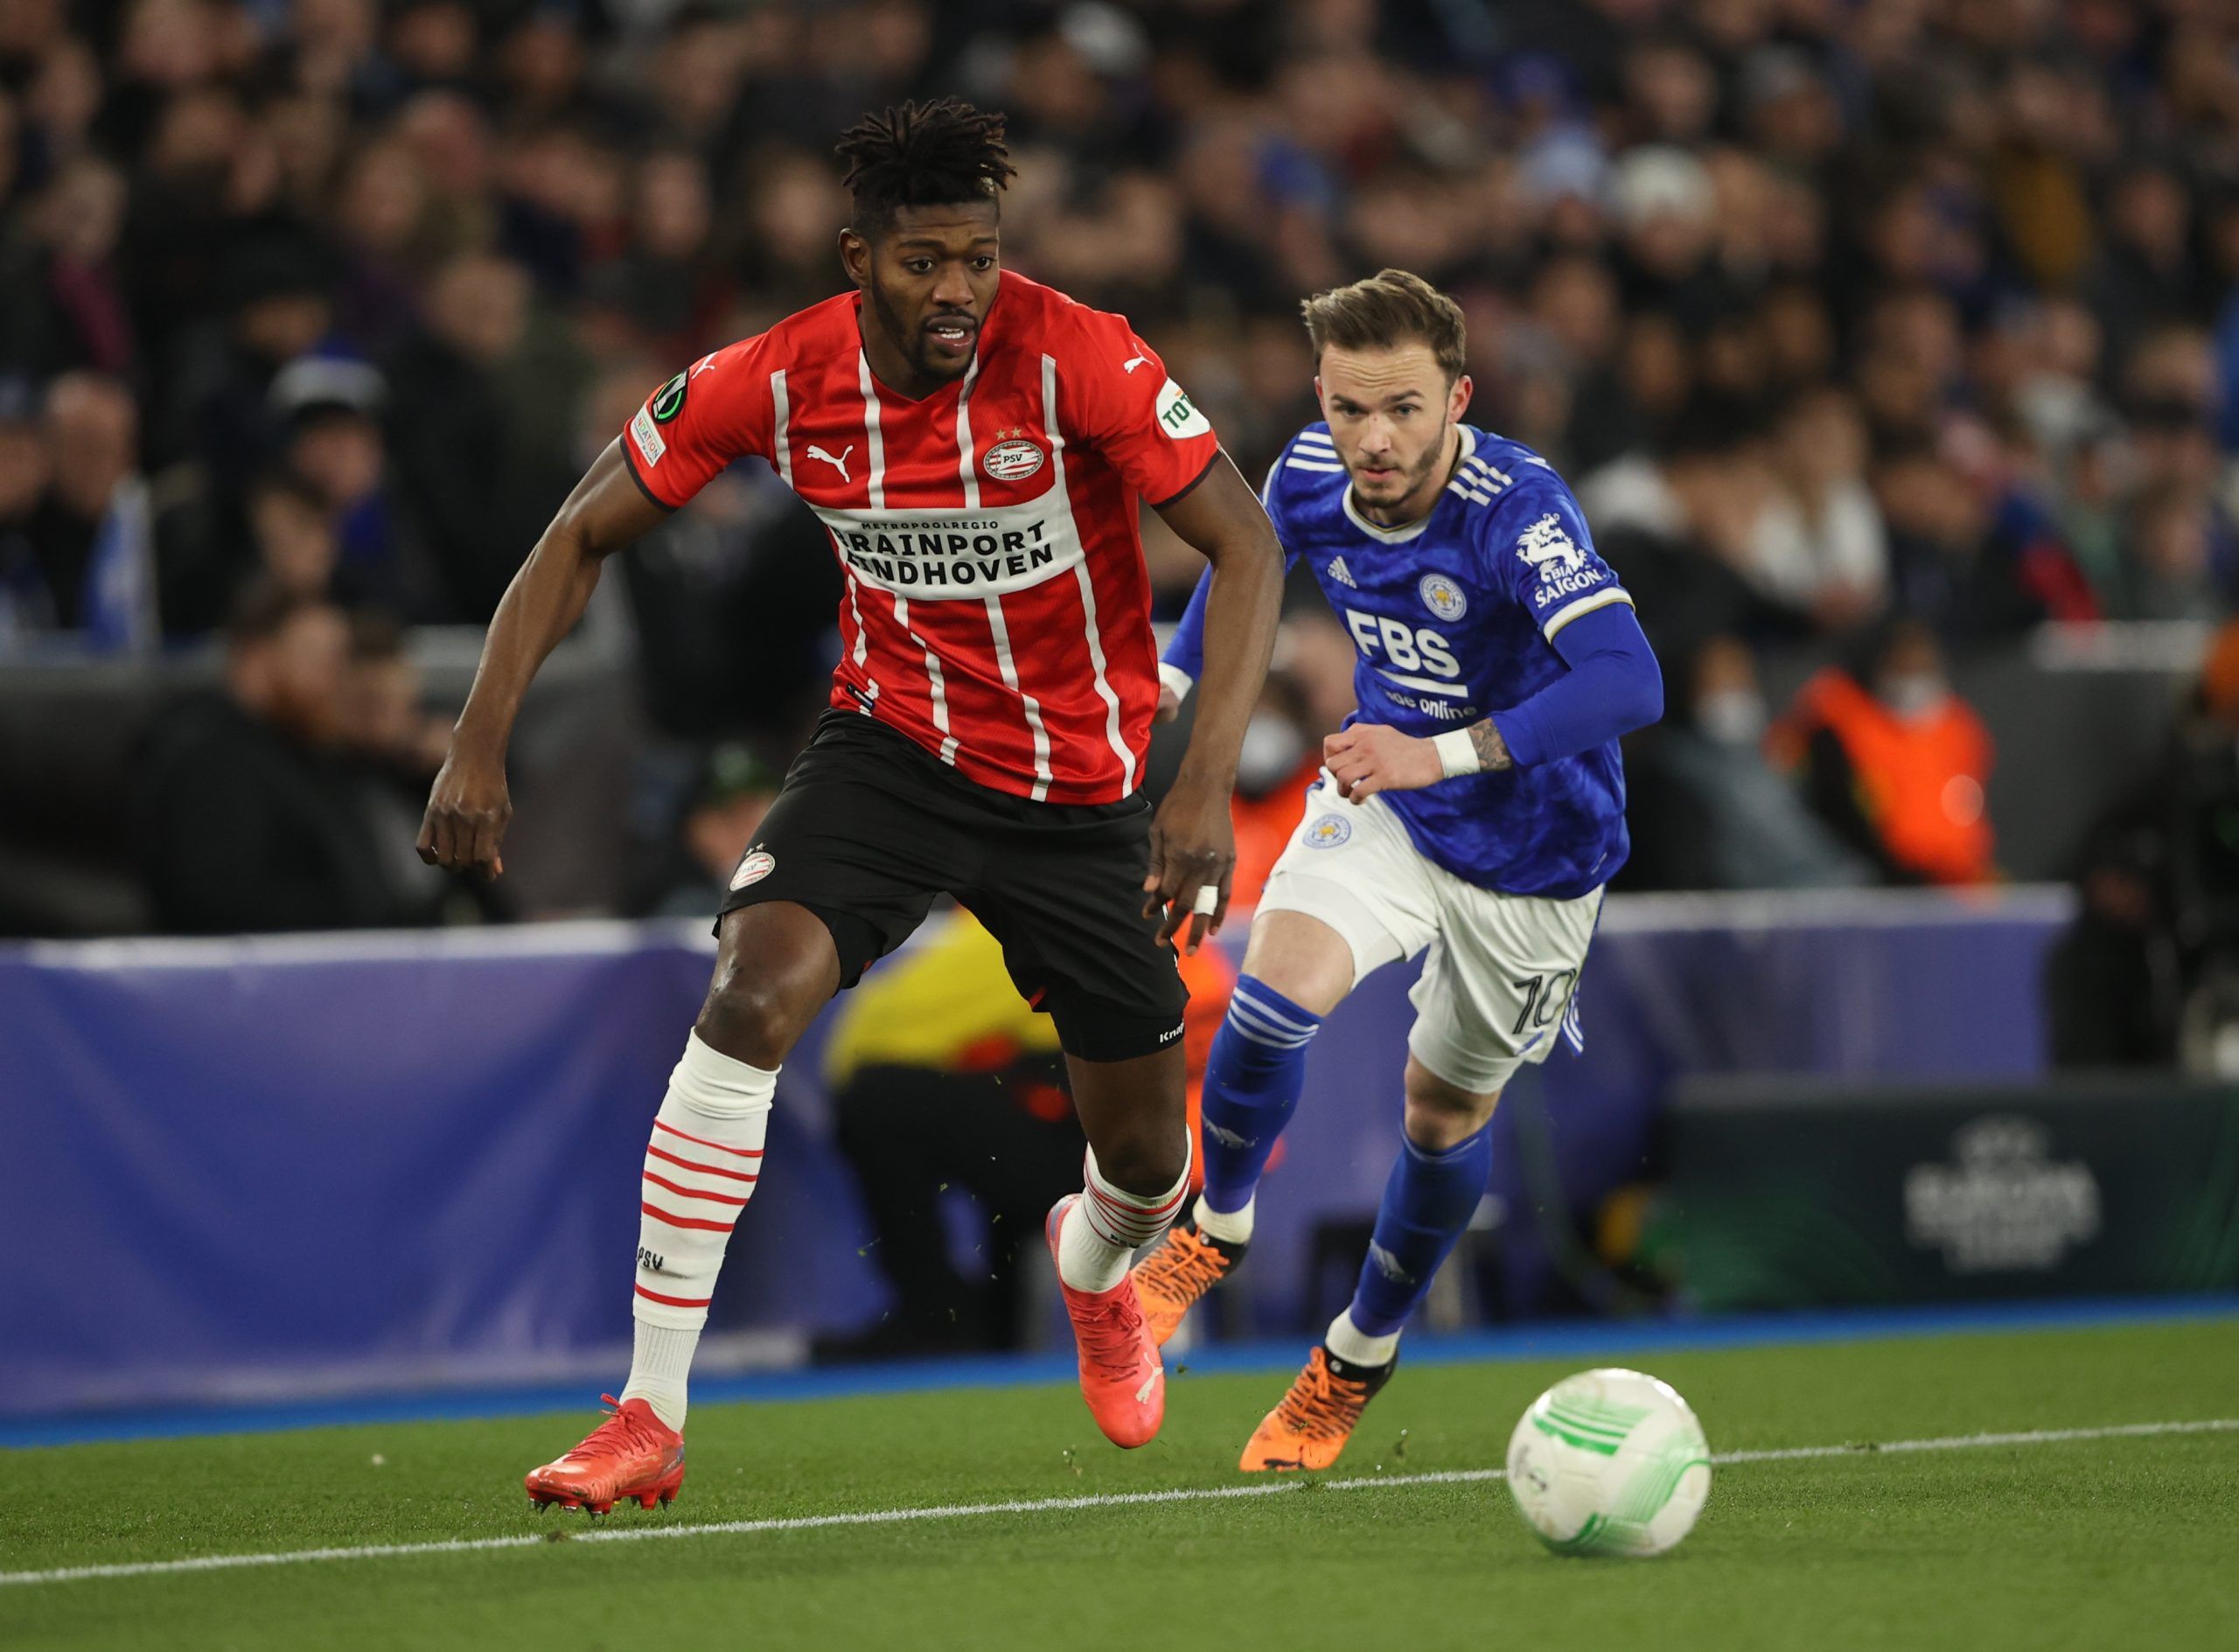 ibrahim-sangare-psv-eredivisie-leicester-city-europa-league-manchester-united-transfer-chelsea-transfer-erik-ten-hag-latest-united-transfer-de-jong-sangare-van-de-beekSoccer Football - Europa League - Quarter Final - First Leg - Leicester City v PSV Eindhoven - King Power Stadium, Leicester, Britain - April 7, 2022 Leicester City's James Maddison in action with PSV Eindhoven's Ibrahim Sangare Action Images via Reuters/Molly Darlington